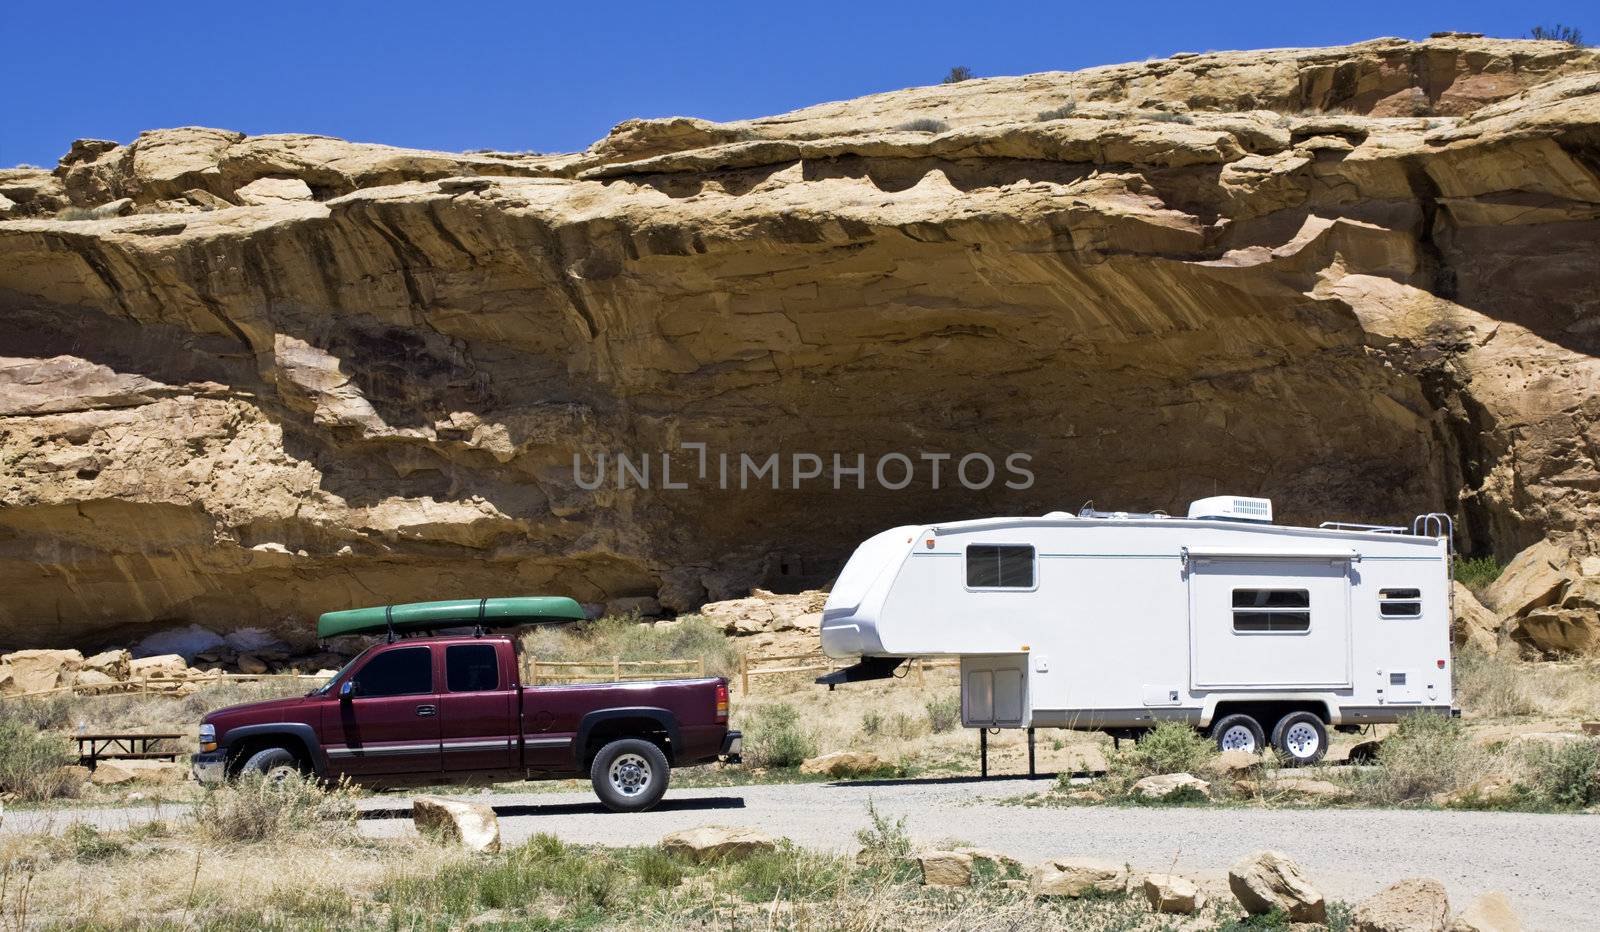 Camping in Chaco Culture National Historic Park, New Mexico.